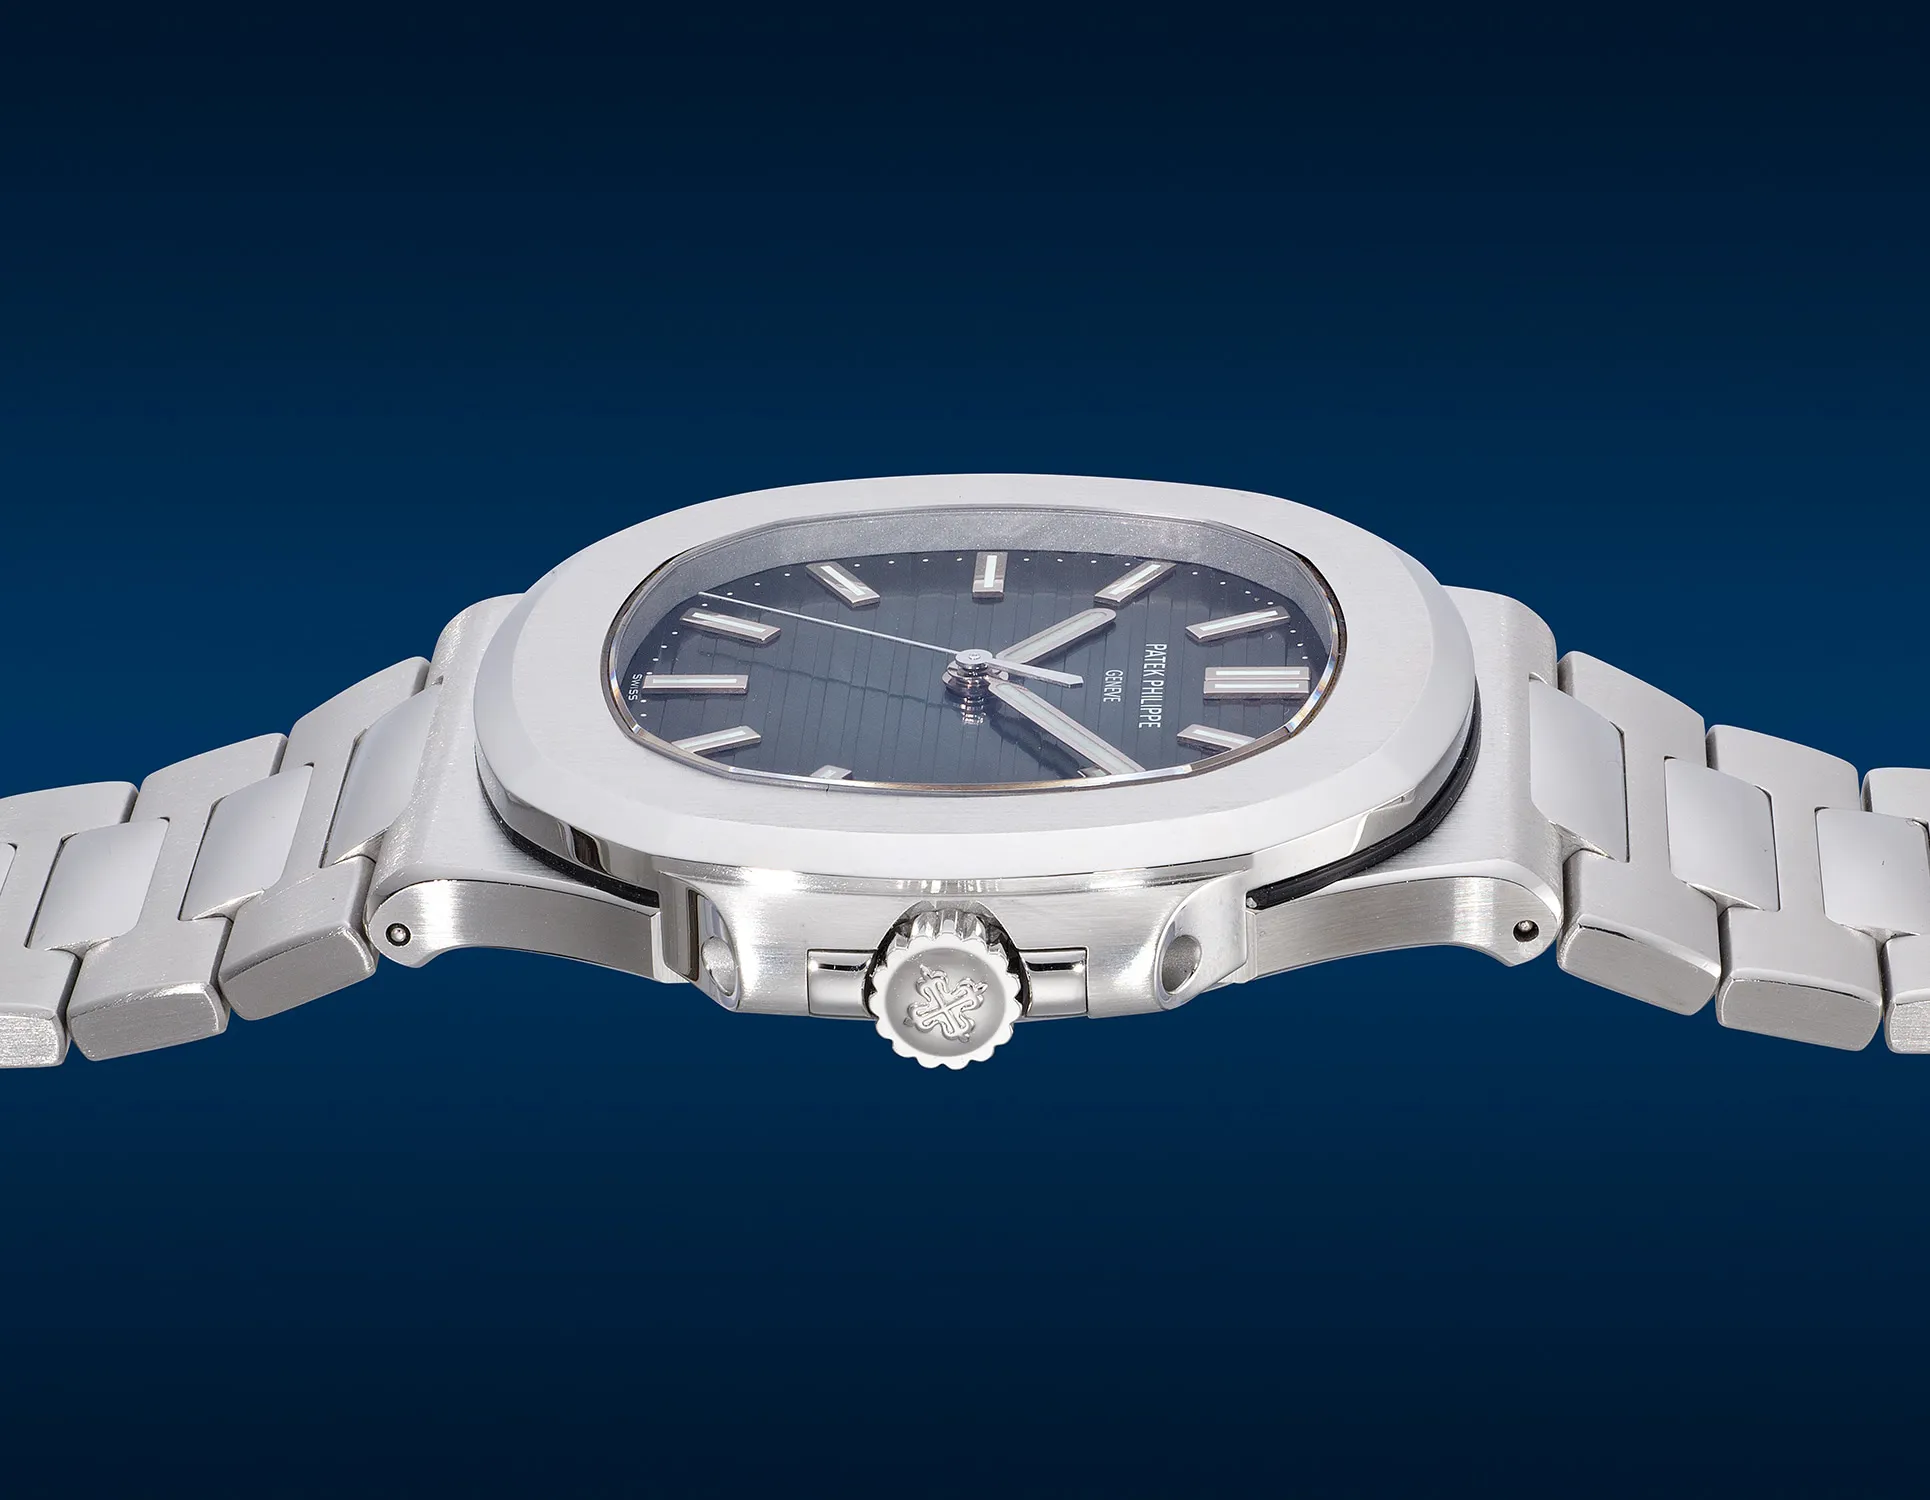 Patek Philippe Nautilus 5711/1A-010 40mm Stainless steel 3